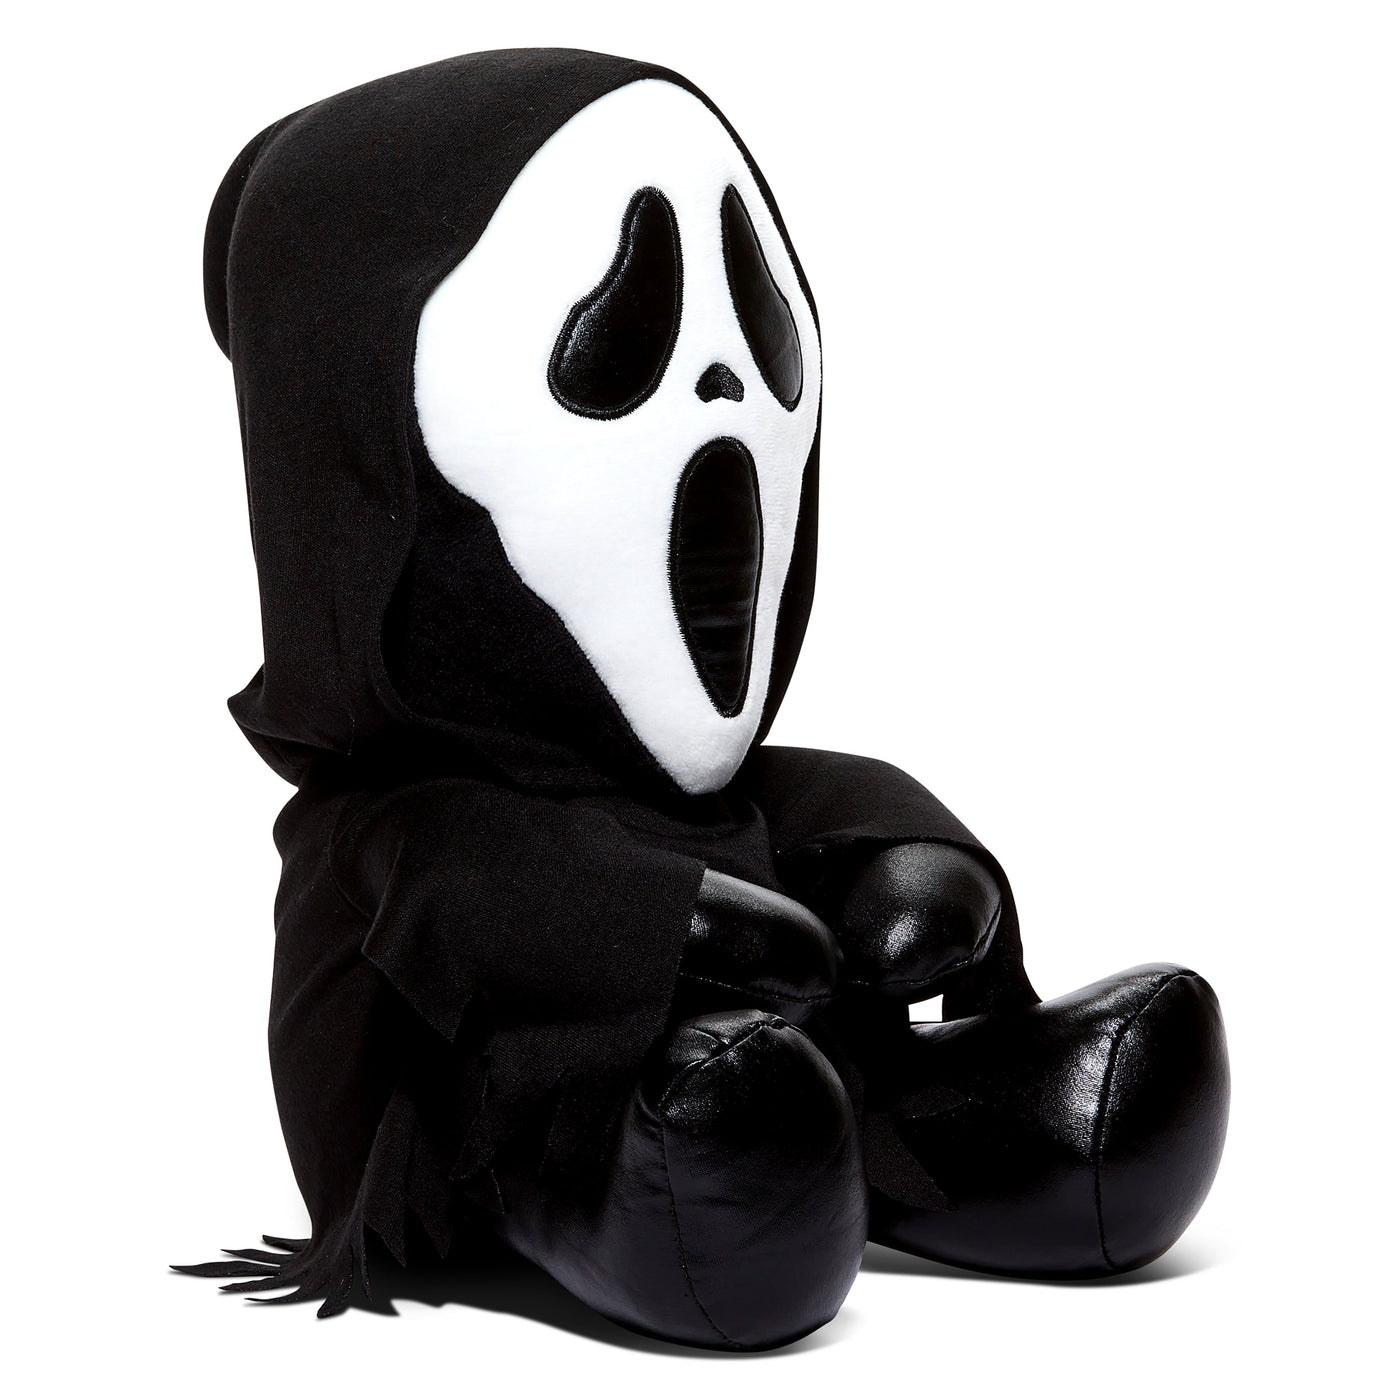 GHOST FACE - 16 INCH HUGME PLUSH